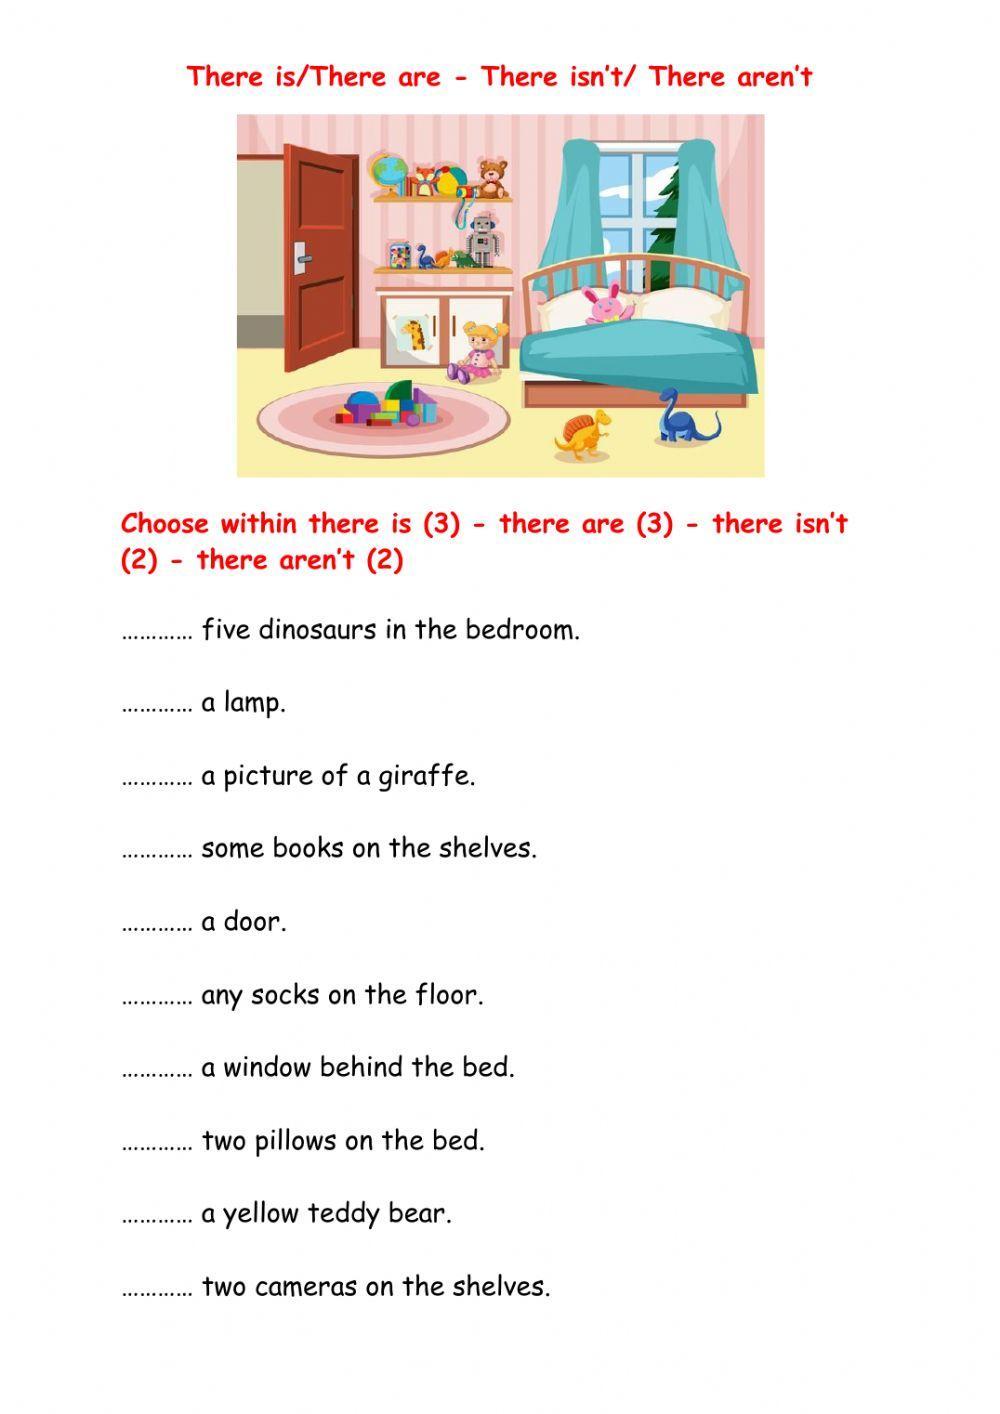 There is-There are- There isn't- There aren't worksheet | Live Worksheets